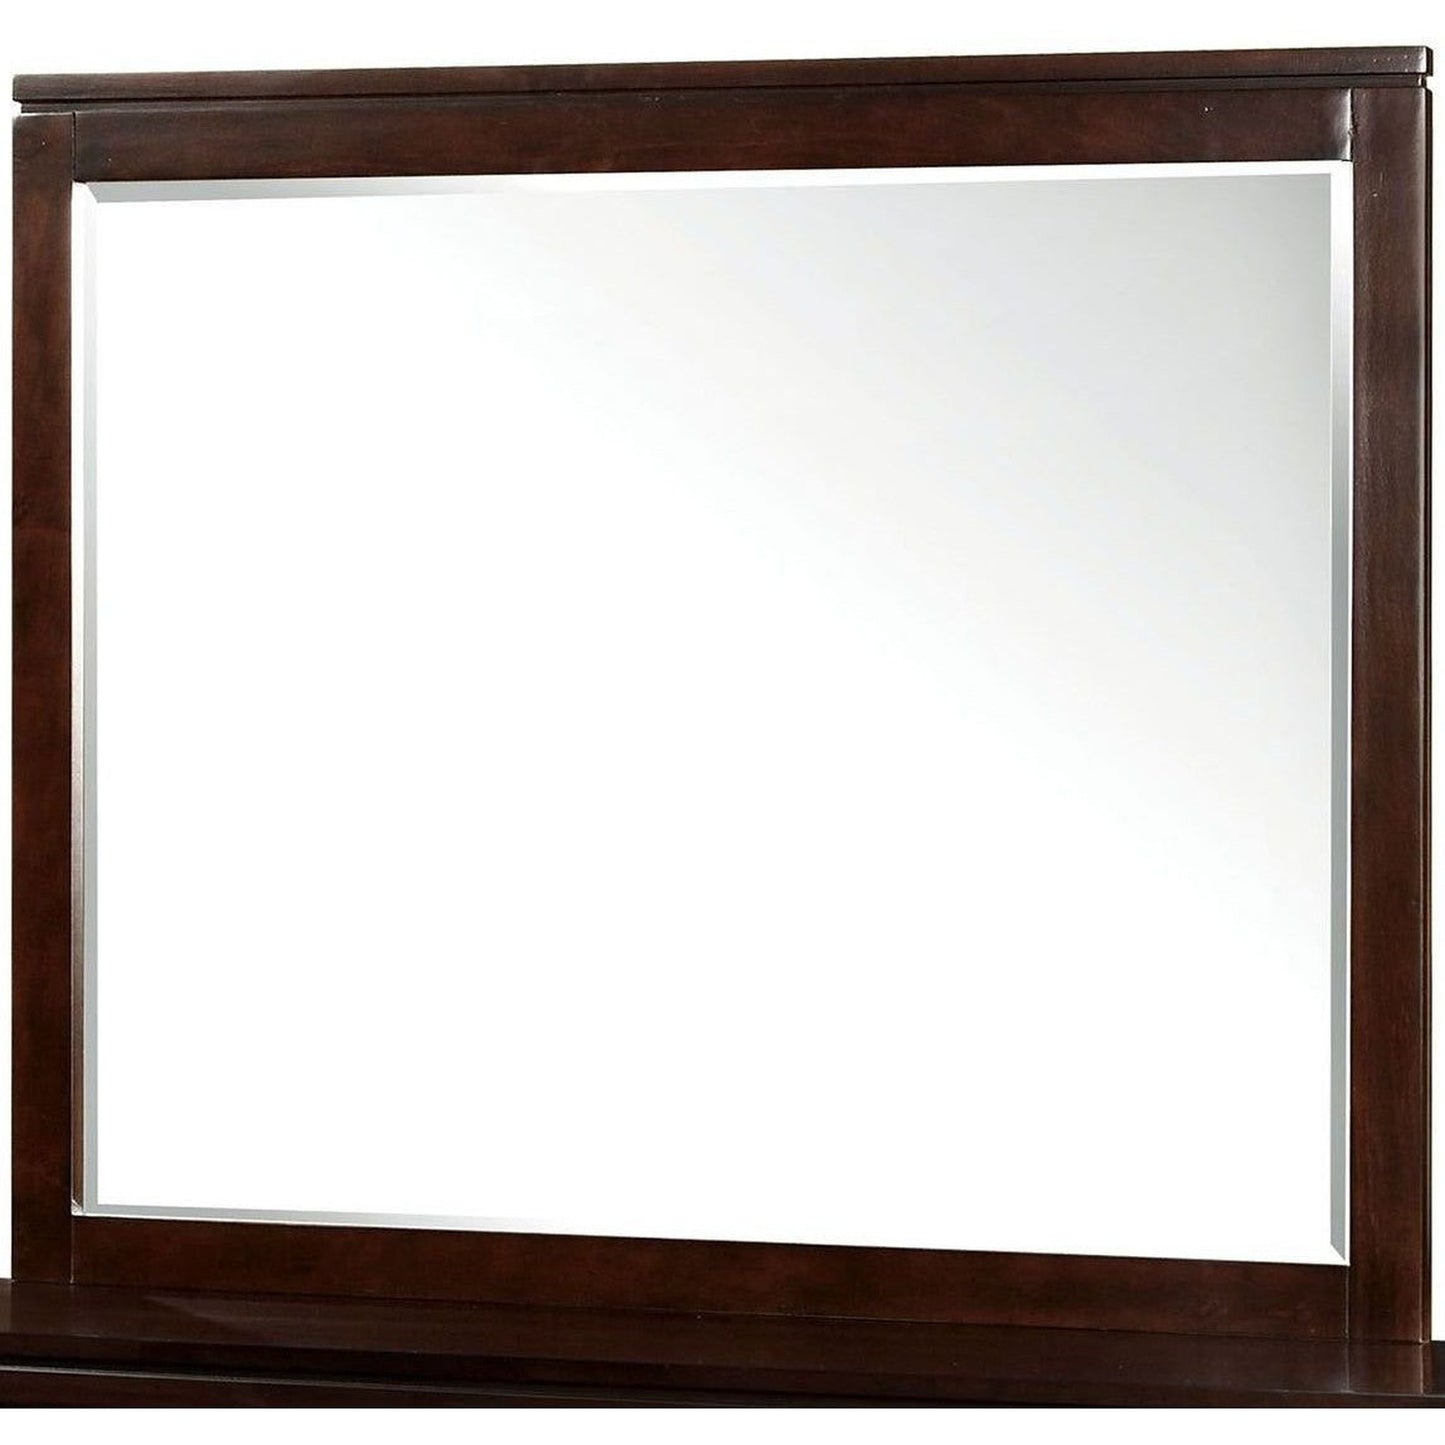 Benzara Balfour Brown Cherry Transitional Style Wooden Framed Wall Mirror